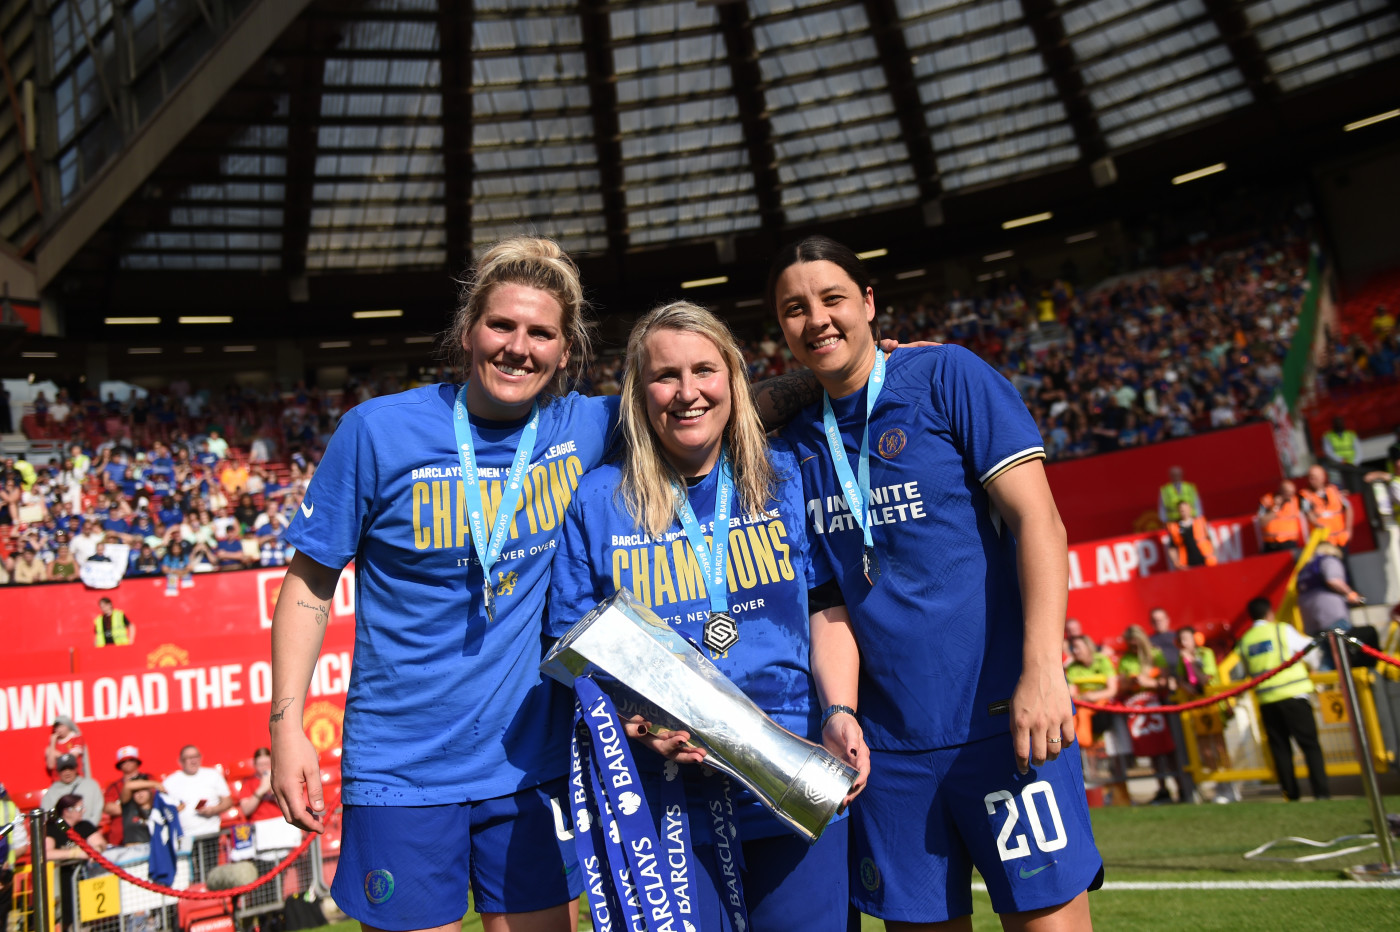 Hayes, centre, and Kerr, right, were highly commended in their categories at the Women's Football Awards